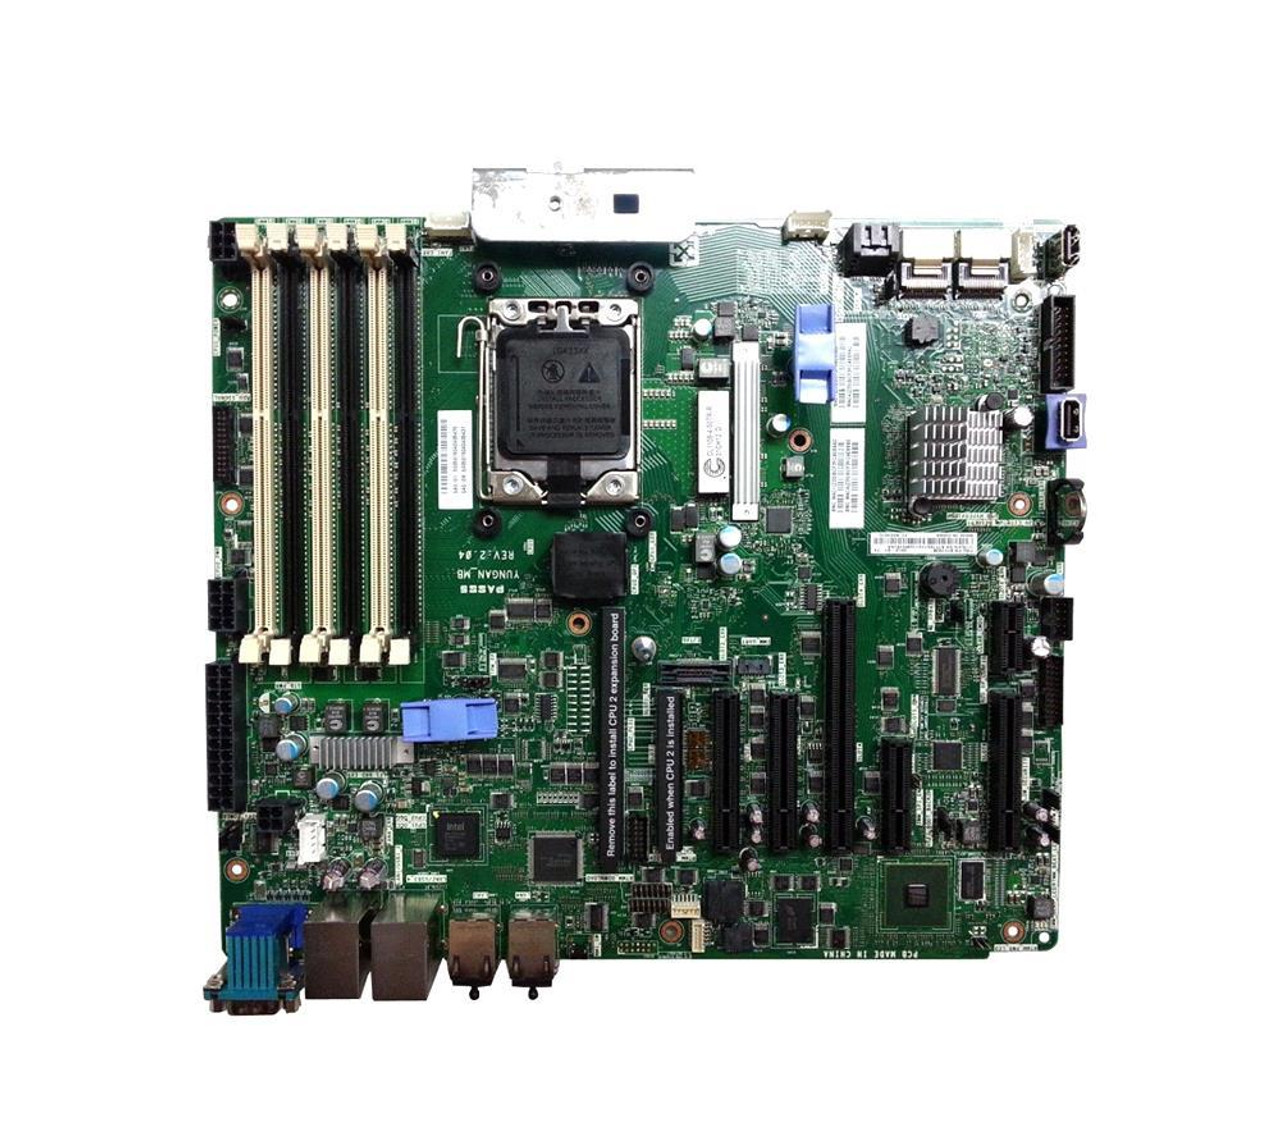 81Y704702 IBM System Board (Motherboard) for System xSeries X3300 M4 (Refurbished)